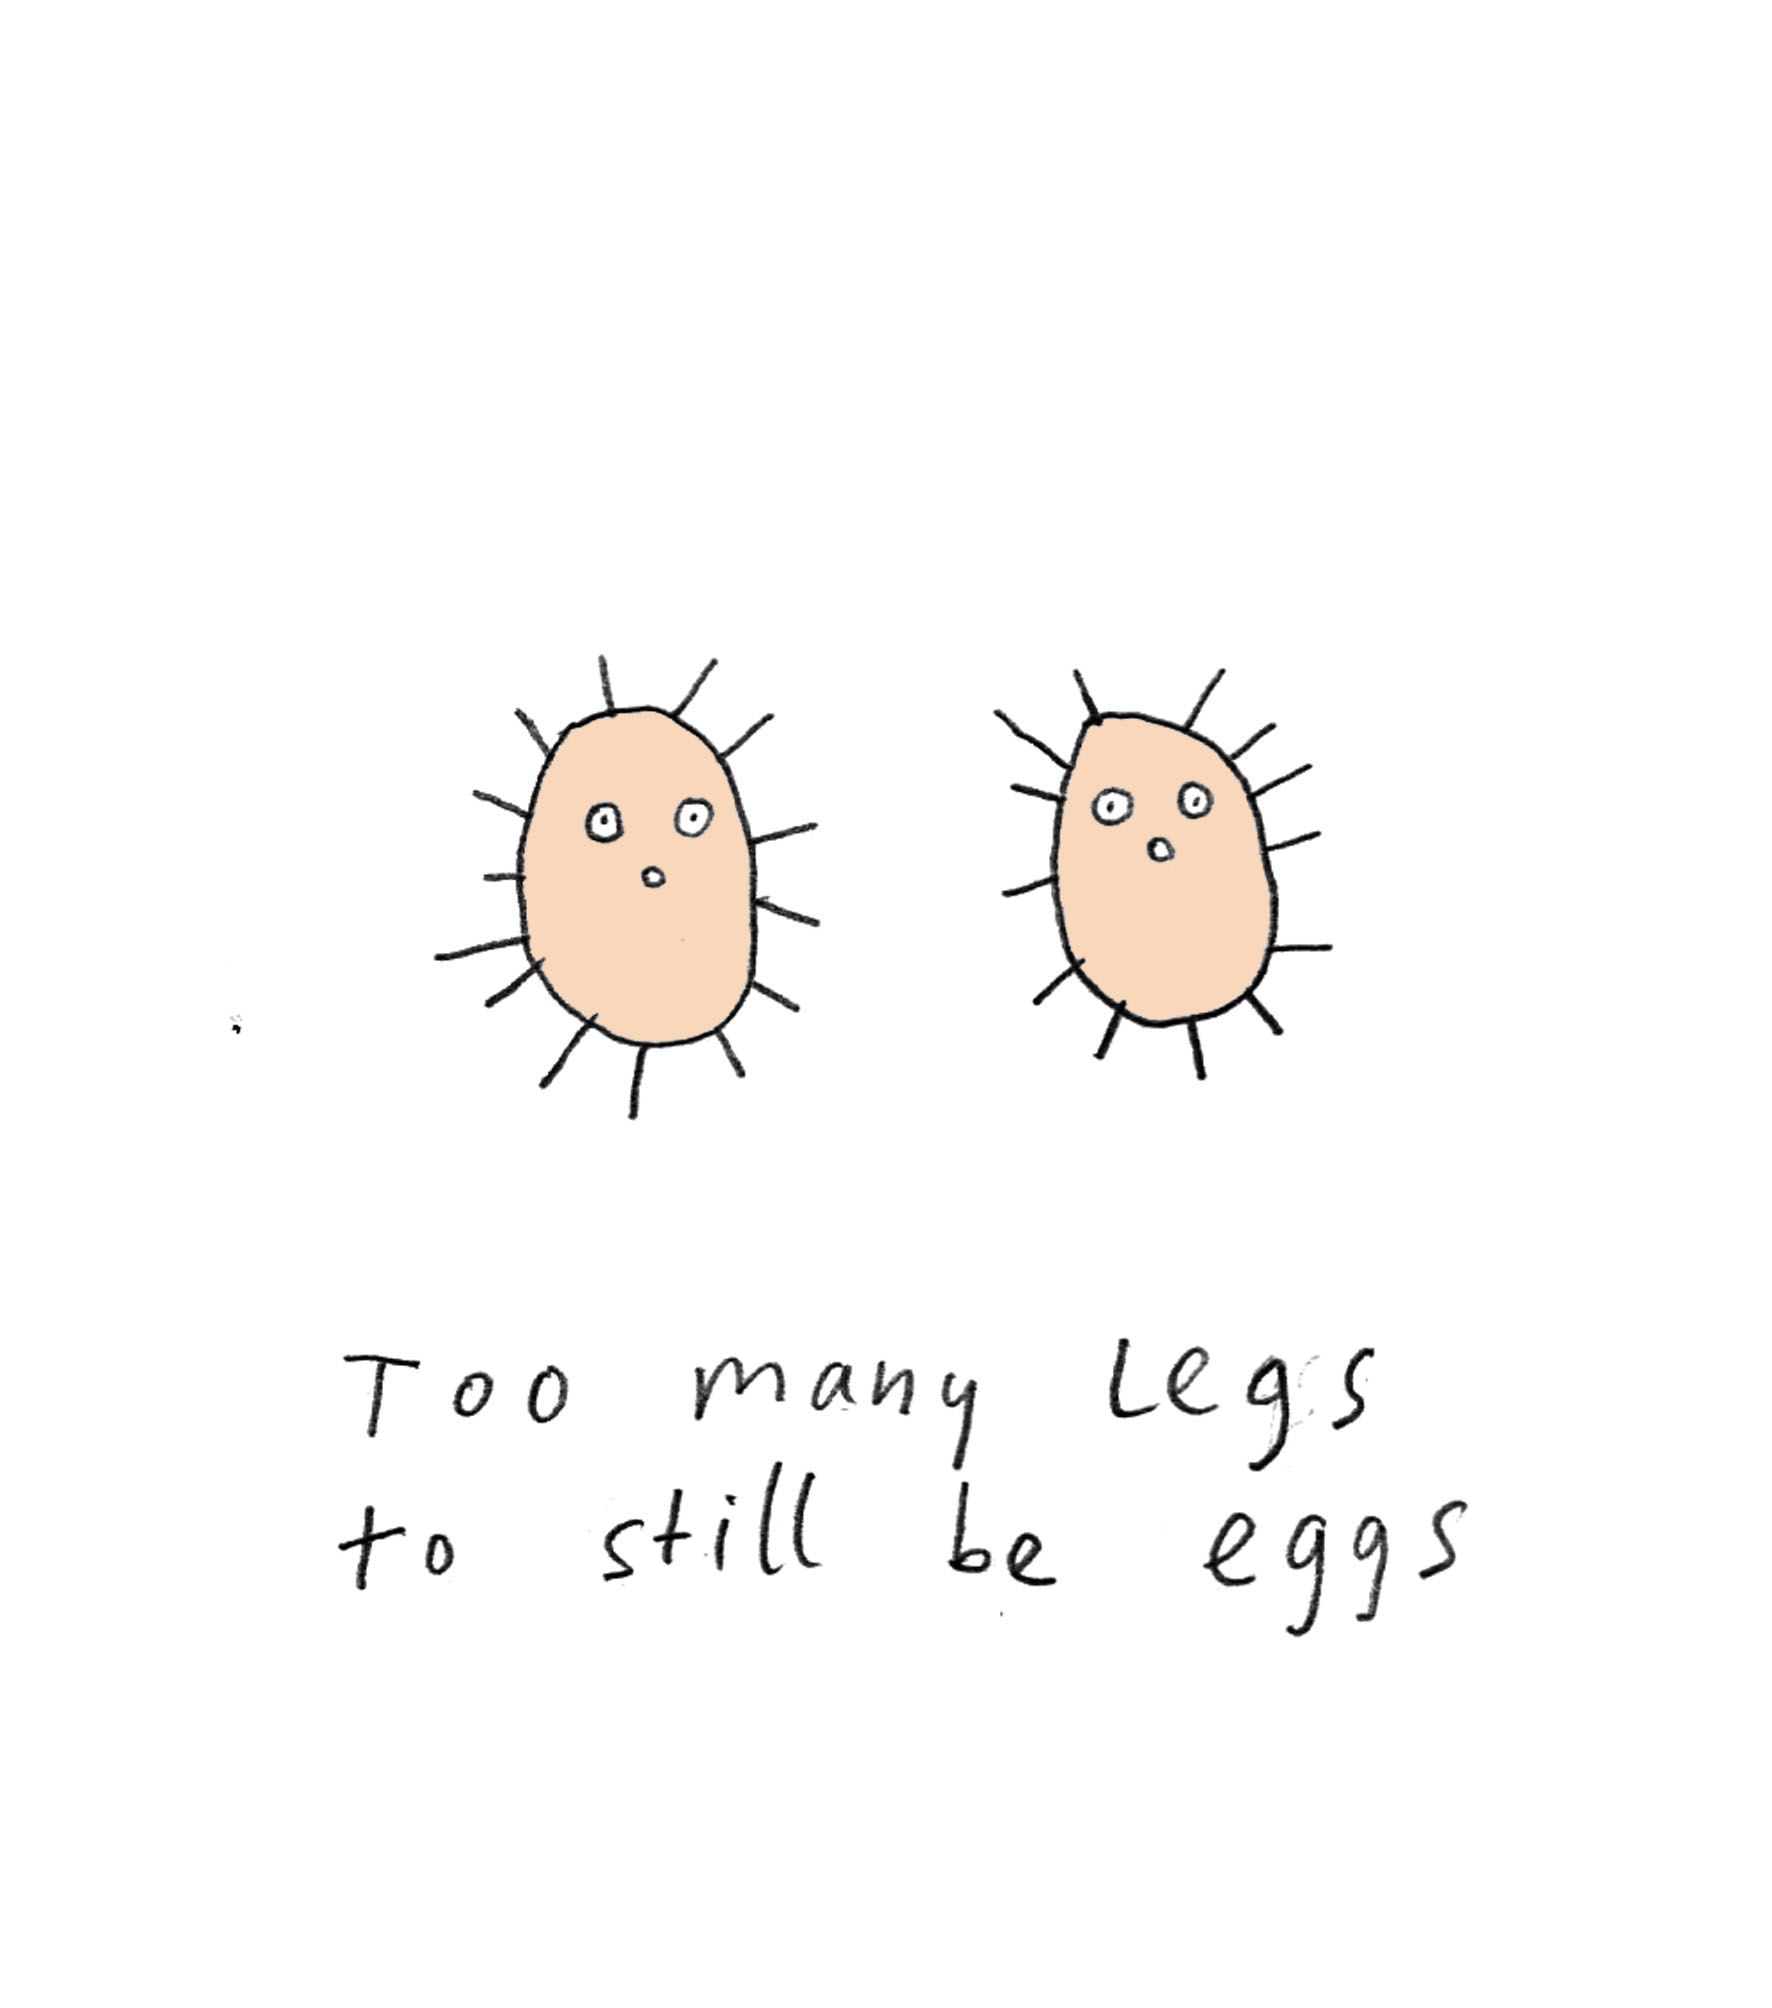 Eggs with legs